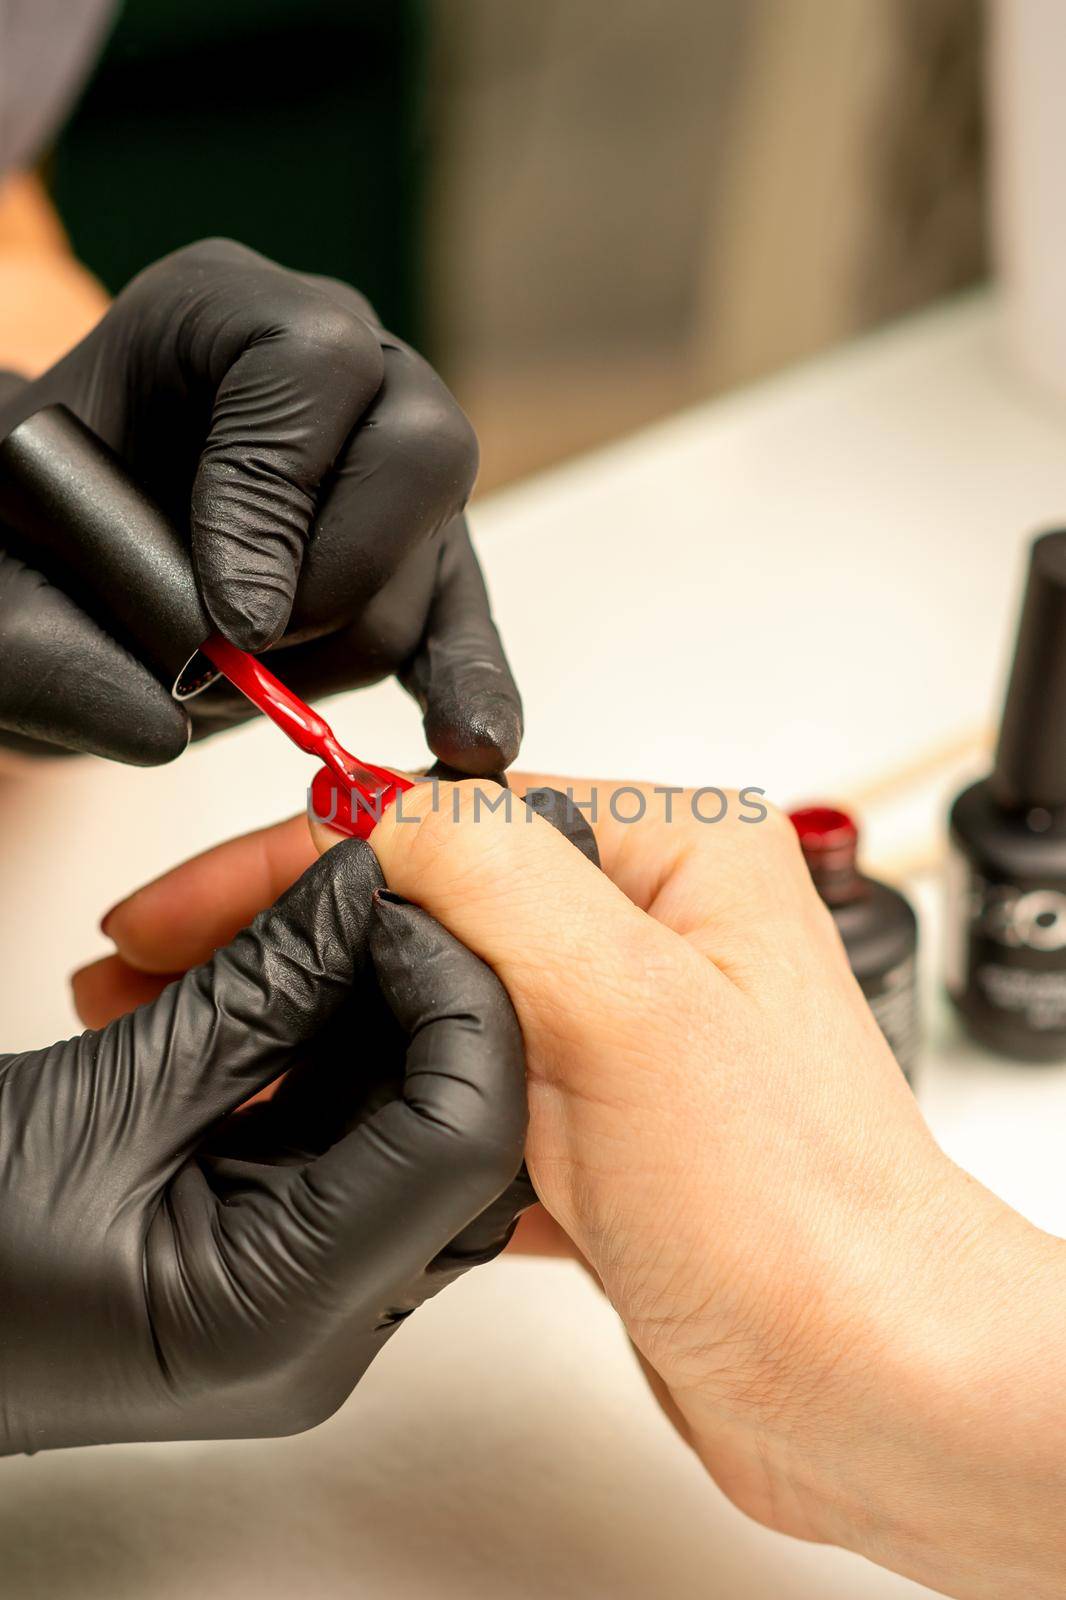 Professional manicure. A manicurist is painting the female nails of a client with red nail polish in a beauty salon, close up. Beauty industry concept. by okskukuruza